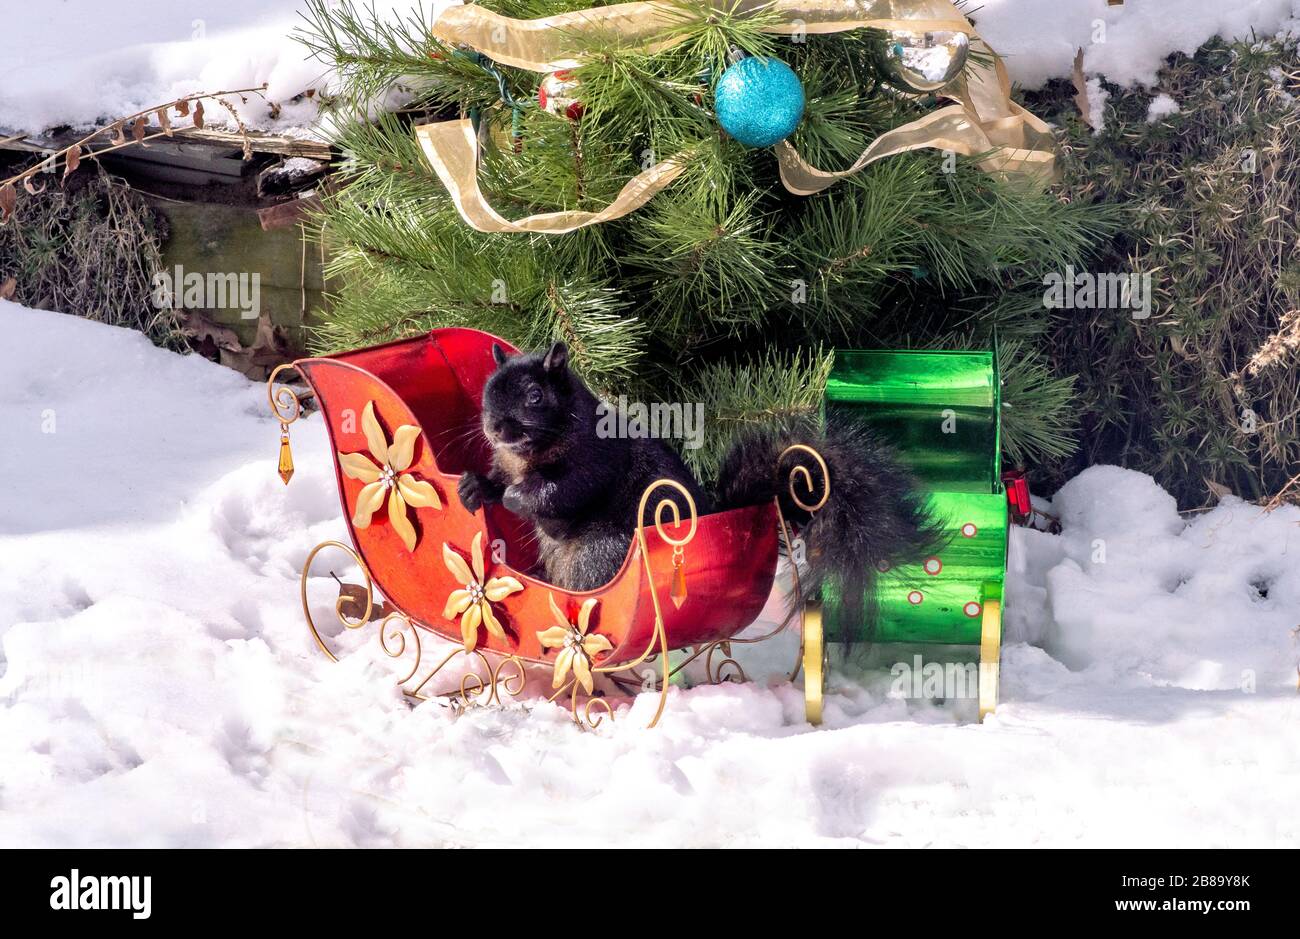 A furry black squirrel poses in an outdoor Christmas display with small sleighs and a decorated Christmas tree Stock Photo